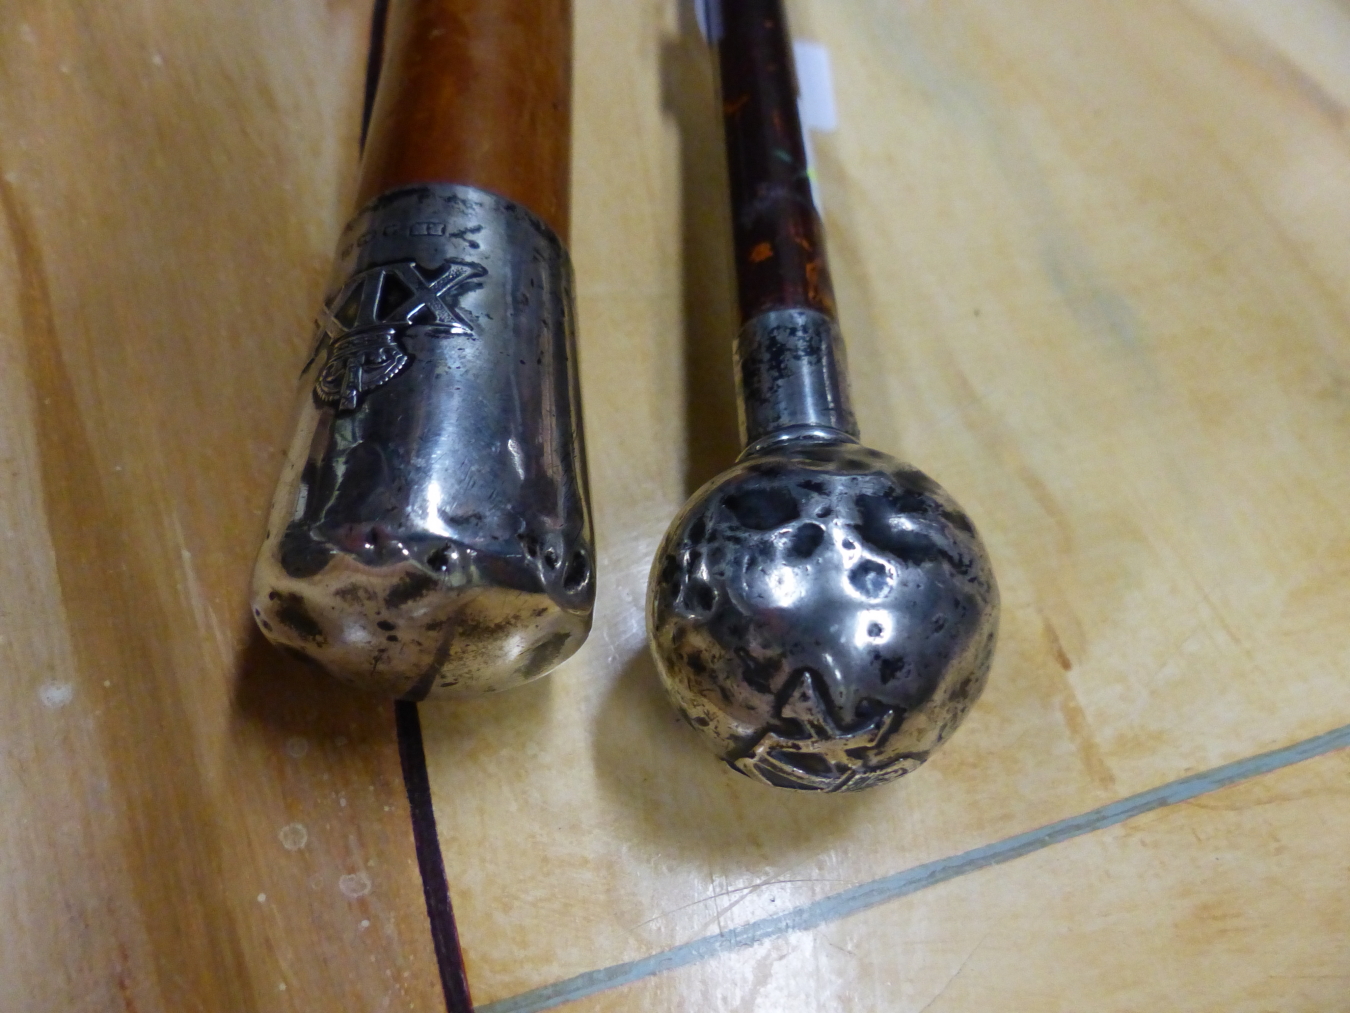 A SILVER MOUNTED SWAGGER STICK, BIRMINGHAM 1931 WITH A CROWN OVER XIX IN RELIEF, POSSIBLY FOR THE - Image 2 of 5